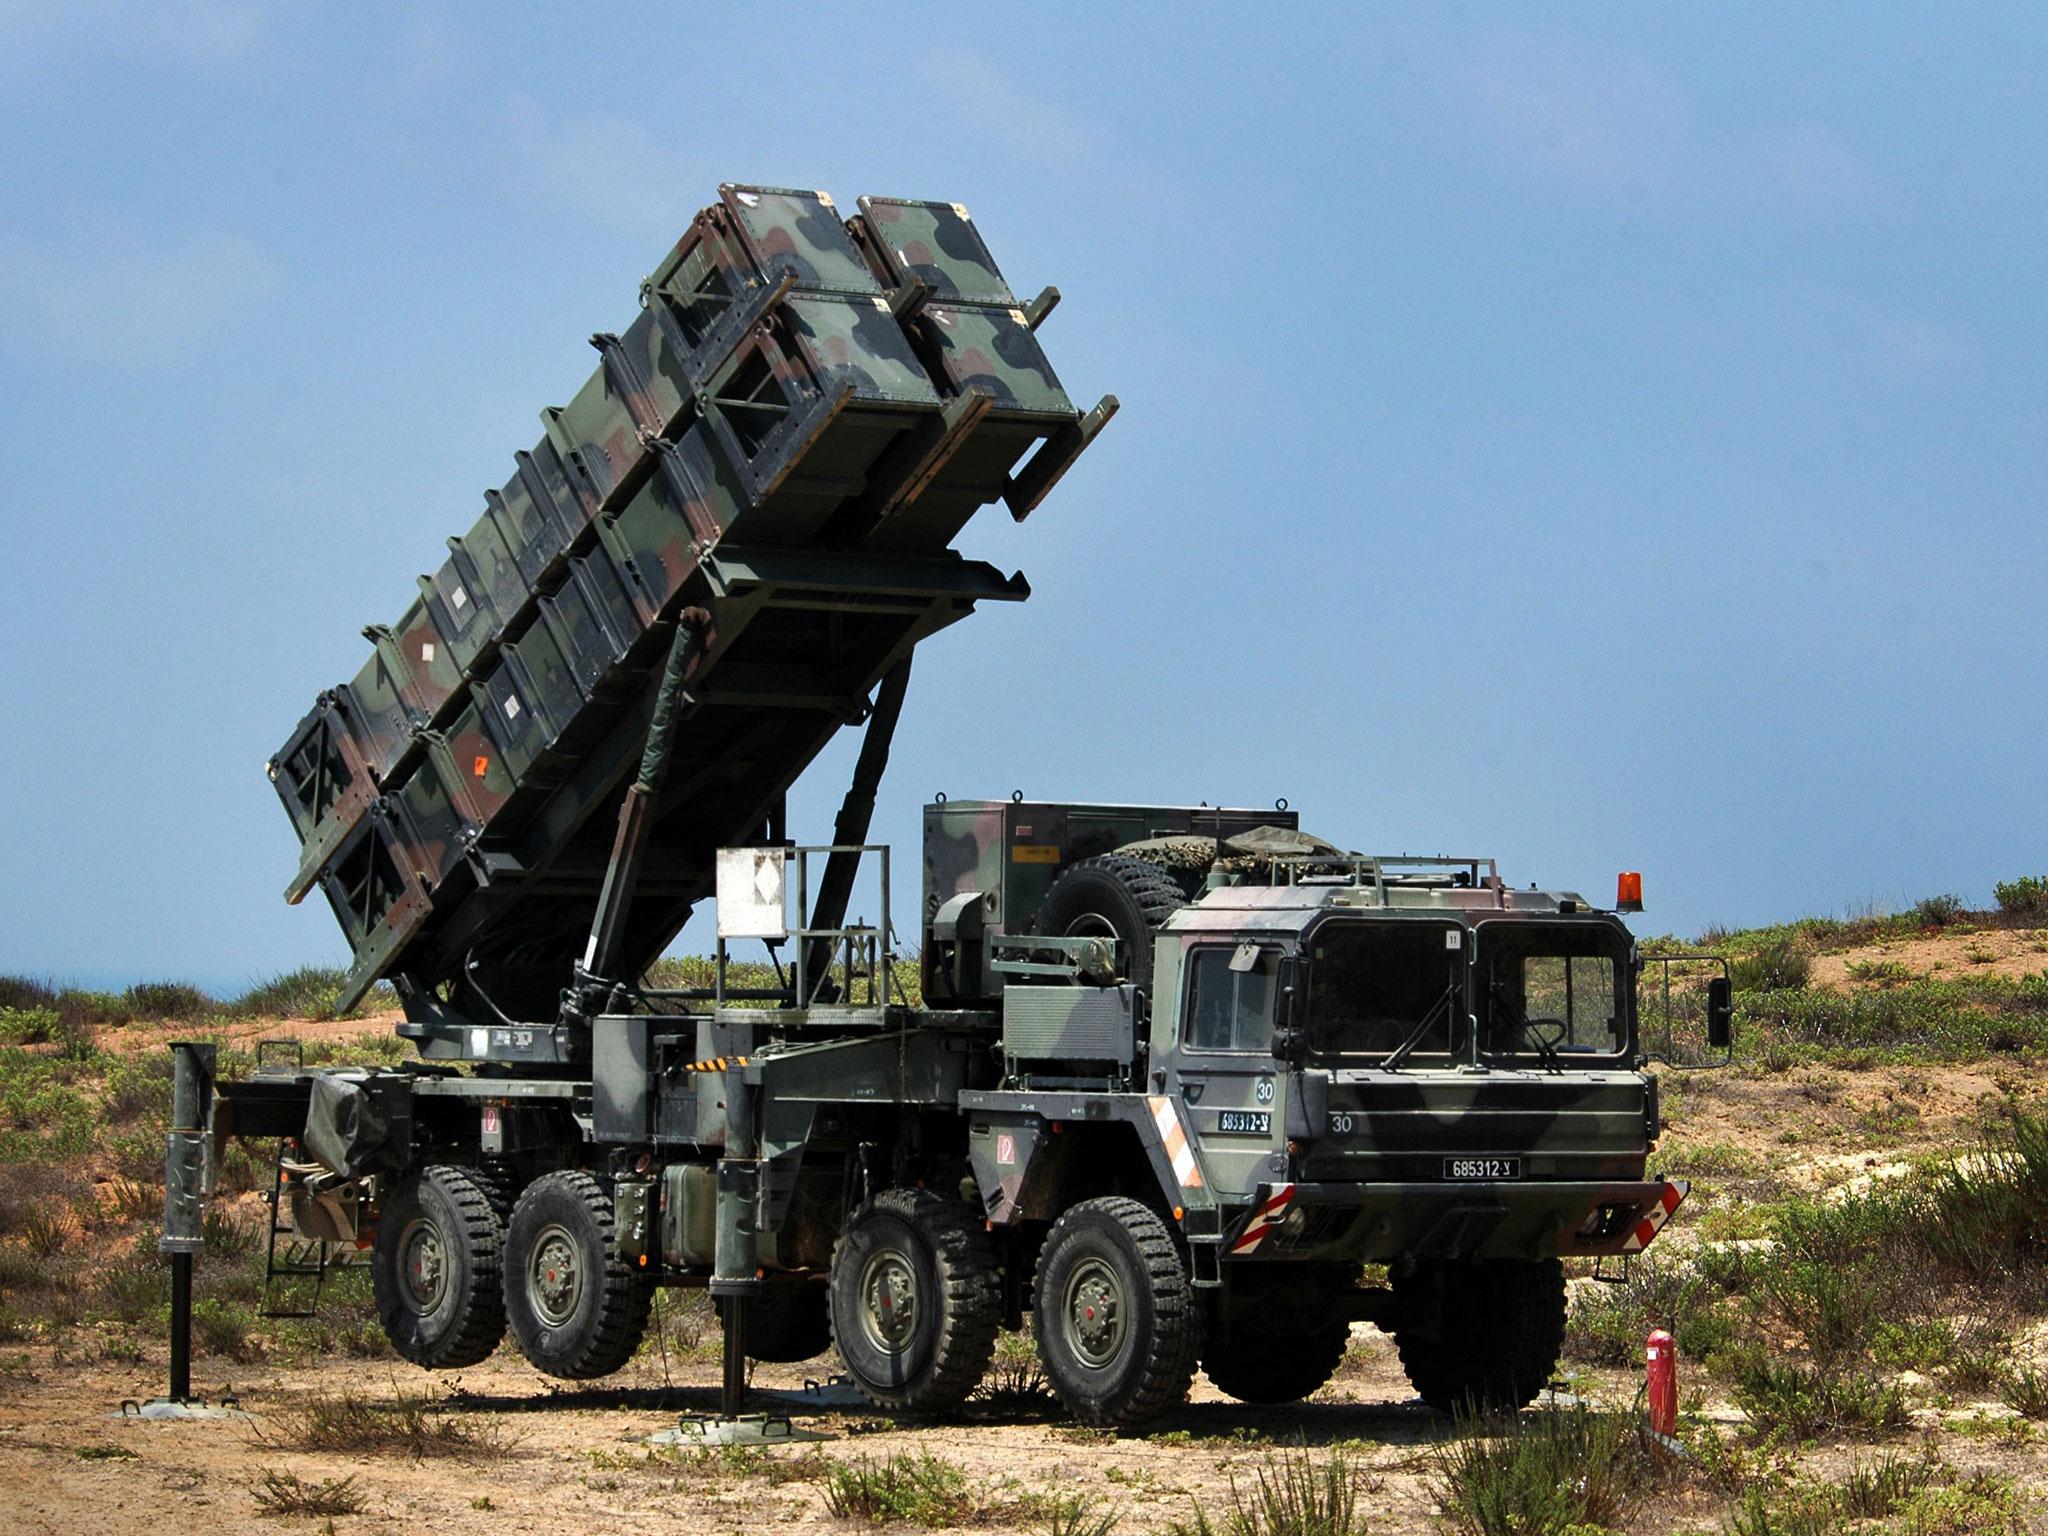 An Israeli army Patriot missile battery deployed at an unidentified base in central Israel on July 30, 2006